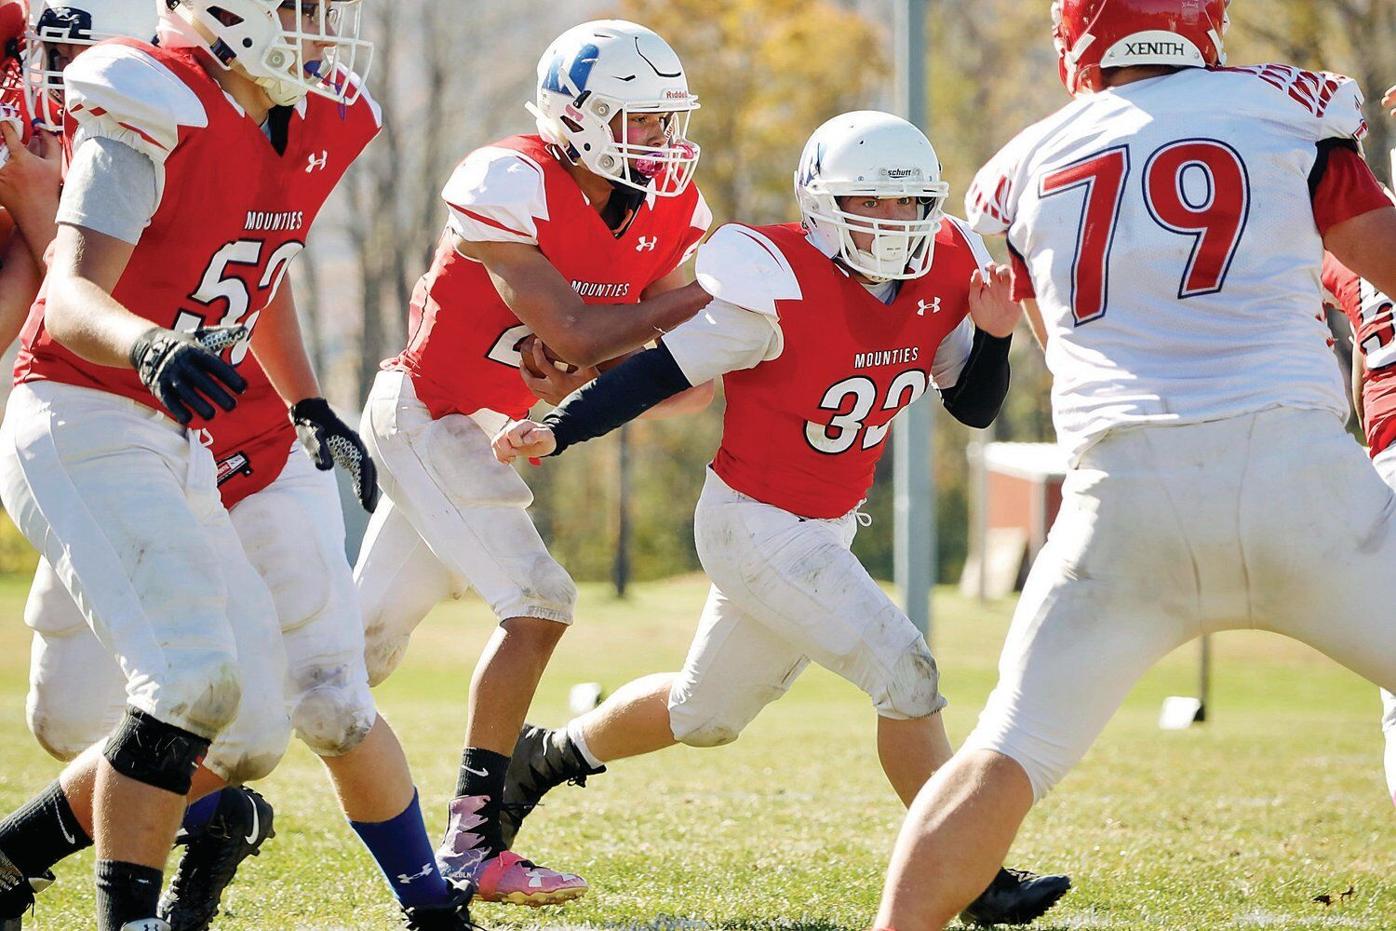 Drury football co-op, playing in Mount Greylock uniforms, rolls to win over Athol